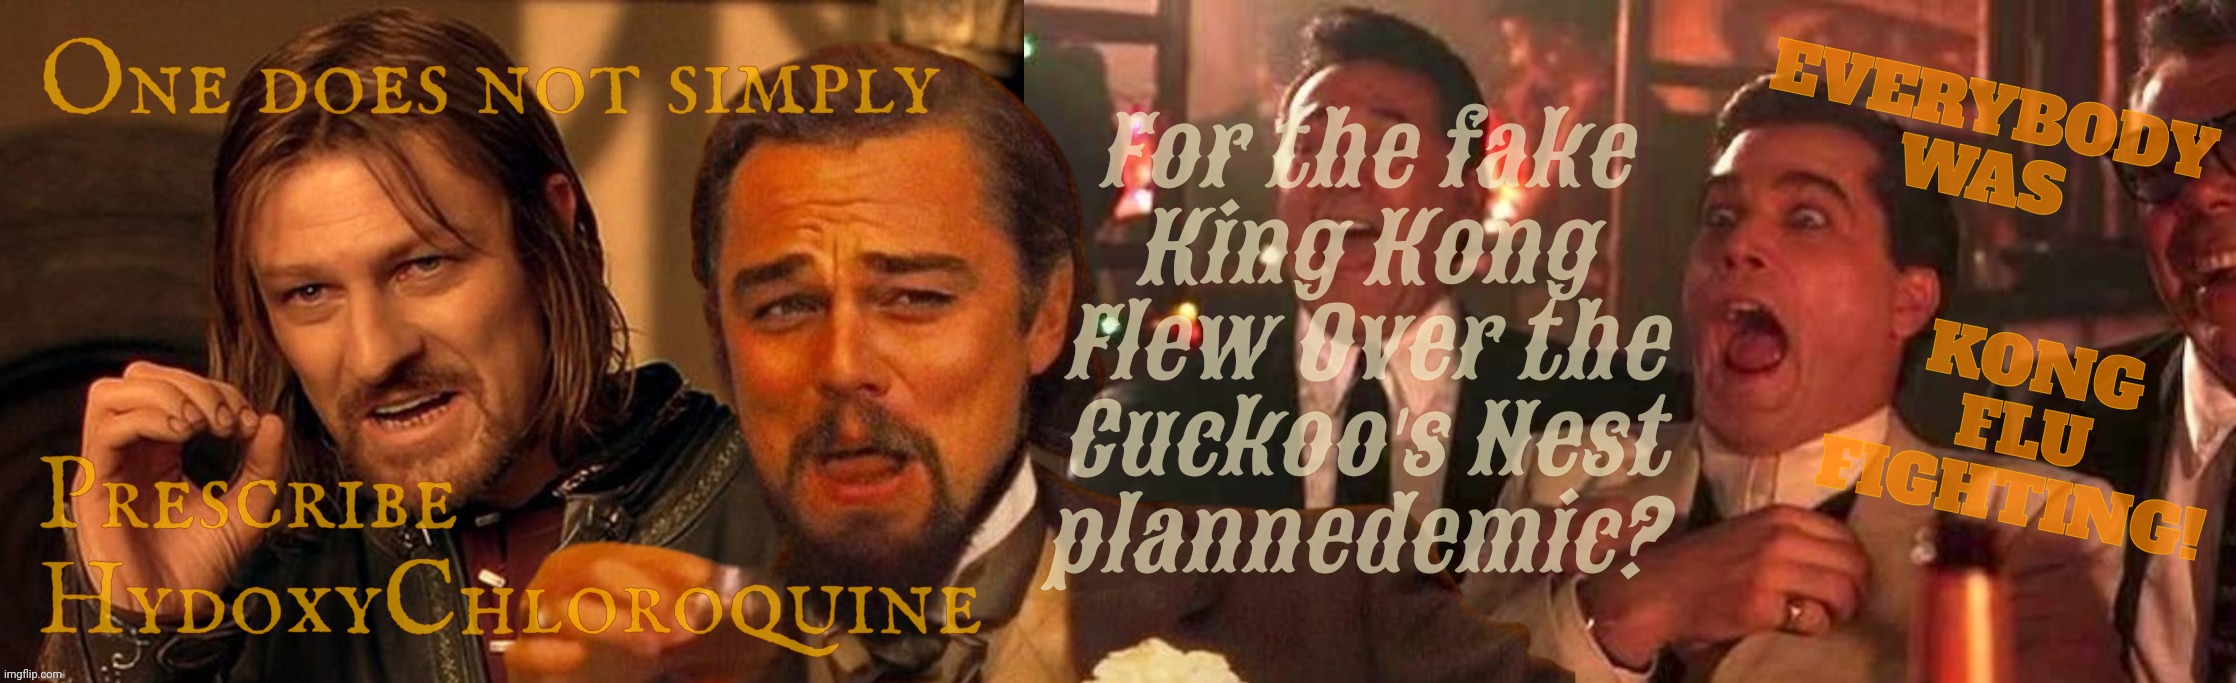 Medical treatments prescribed by anti-vaxx COVID-19 denying QAnon nutters because logic | One does not simply Prescribe 
HydoxyChloroquine For the fake
King Kong
Flew Over the
Cuckoo's Nest
plannedemic? EVERYBODY WAS KONG
FLU
FIGH | image tagged in one does not simply laughing leo goodfellas laughing,hydroxychloroquine,covid-19,disease denying qanon,anti-vax nutters,derp | made w/ Imgflip meme maker